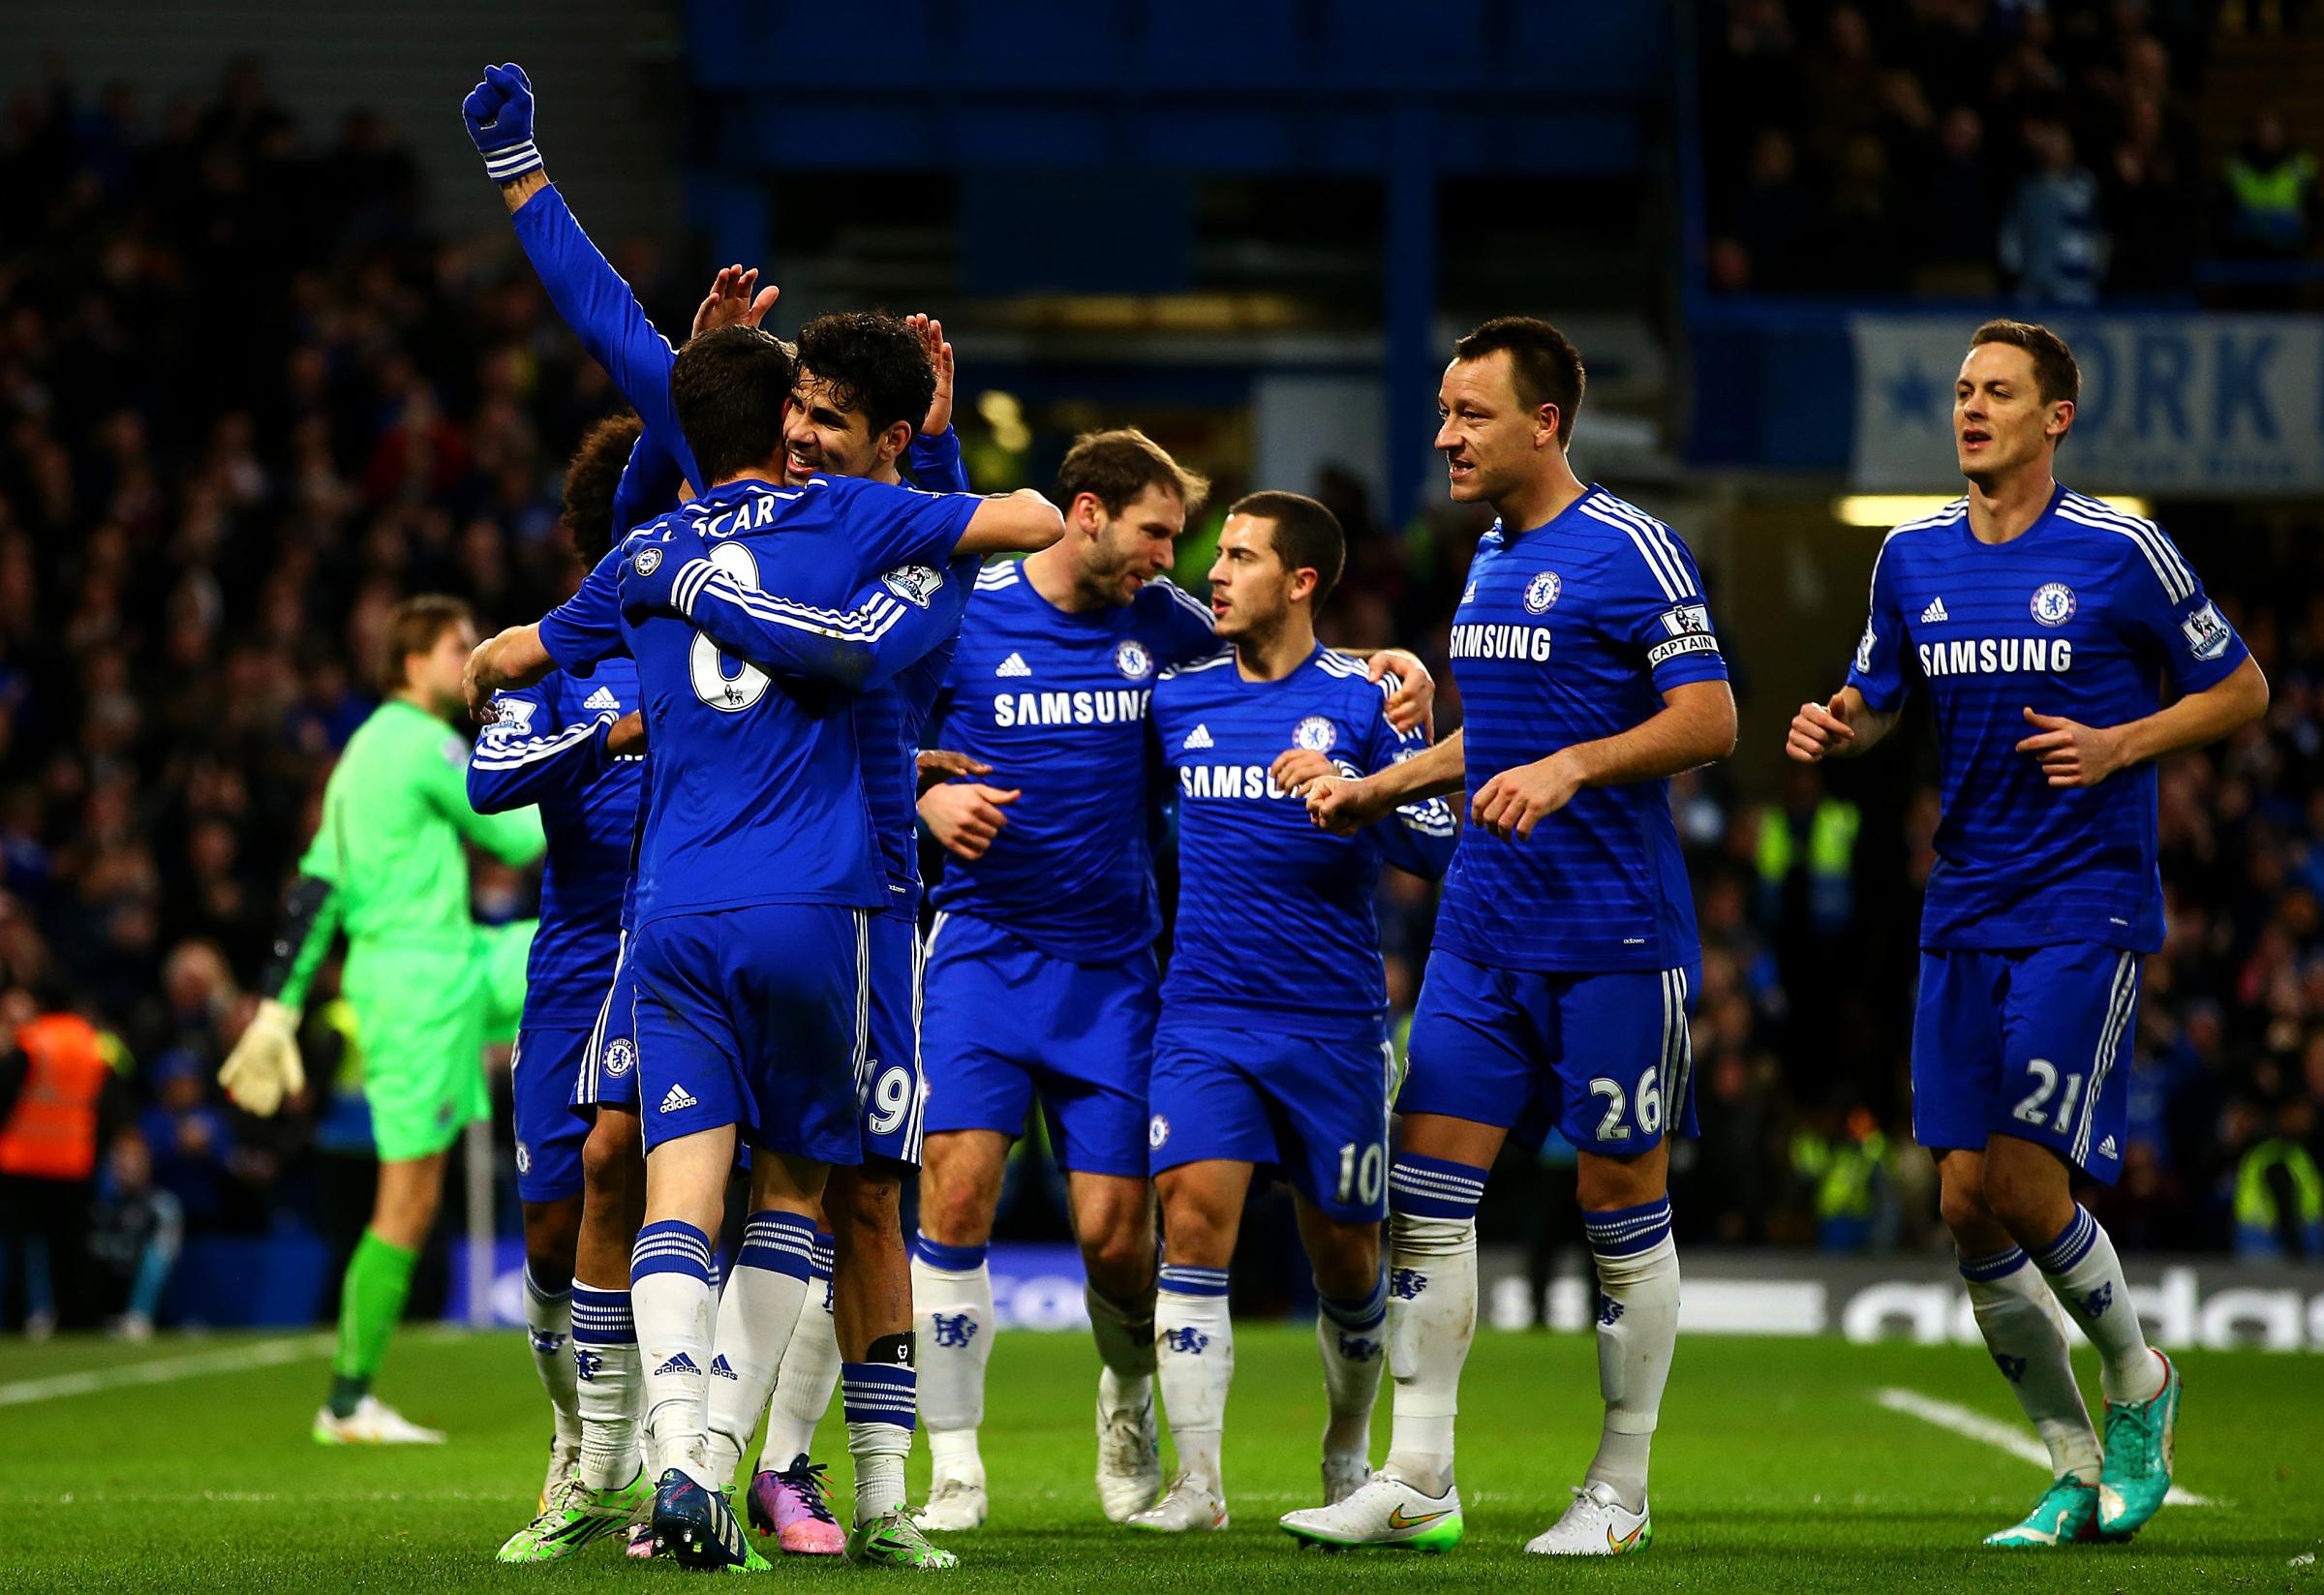 Diego Costa of Chelsea celebrates with team-mates after scoring his team's second goal during the Barclays Premier League match between Chelsea and Newcastle United at Stamford Bridge on Jan. 10, 2015 in London.